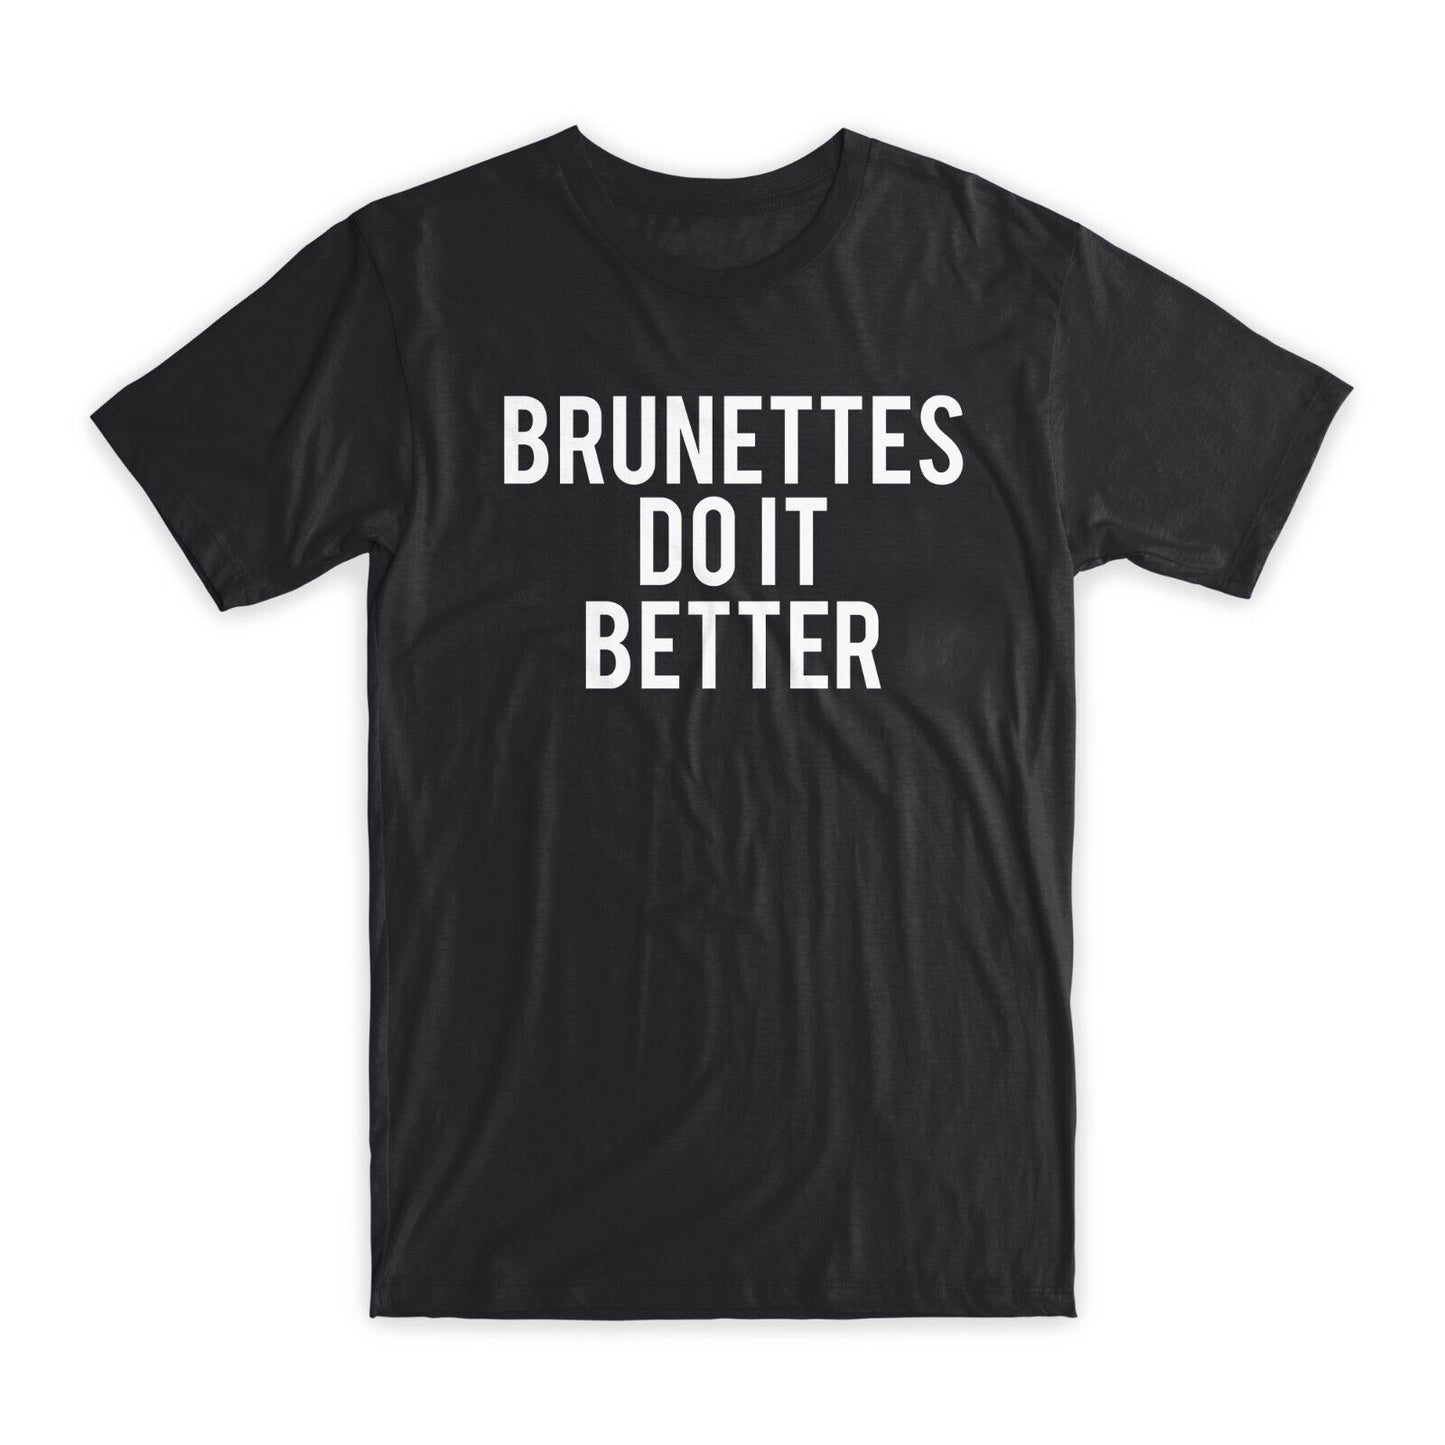 Brunettes Do It Better T-Shirt Premium Soft Cotton Crew Neck Funny Tee Gifts NEW